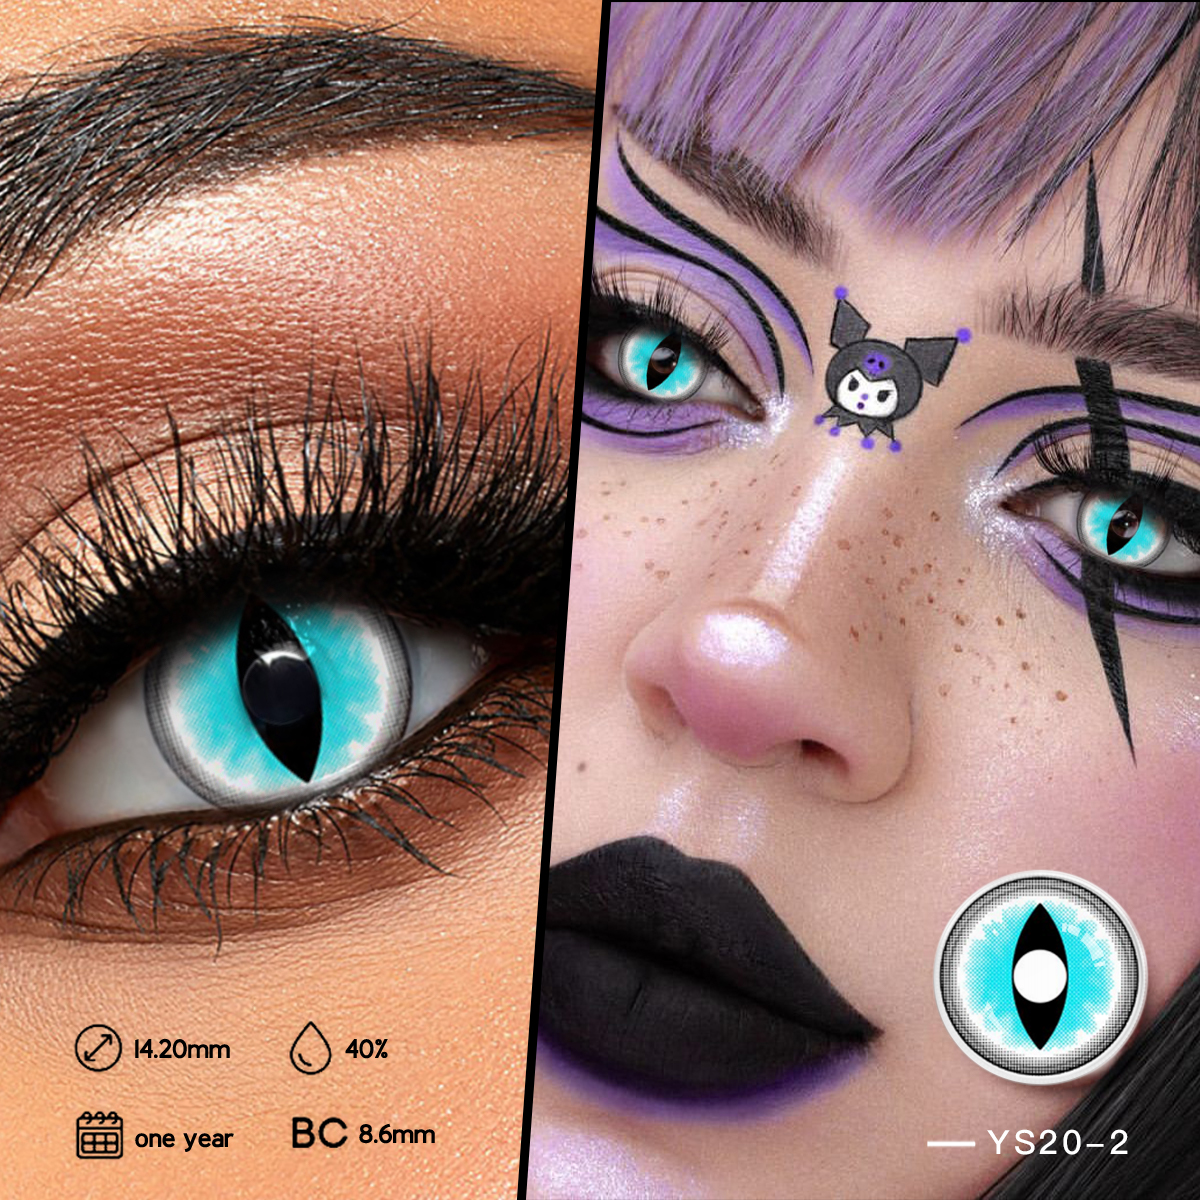 Dbeyes oem/odm contact lenses Blue Cat Eye Halloween Contacts Selemo le Selemo Cosplay Contacts Lenses Soft Crazy Party Contact Lens